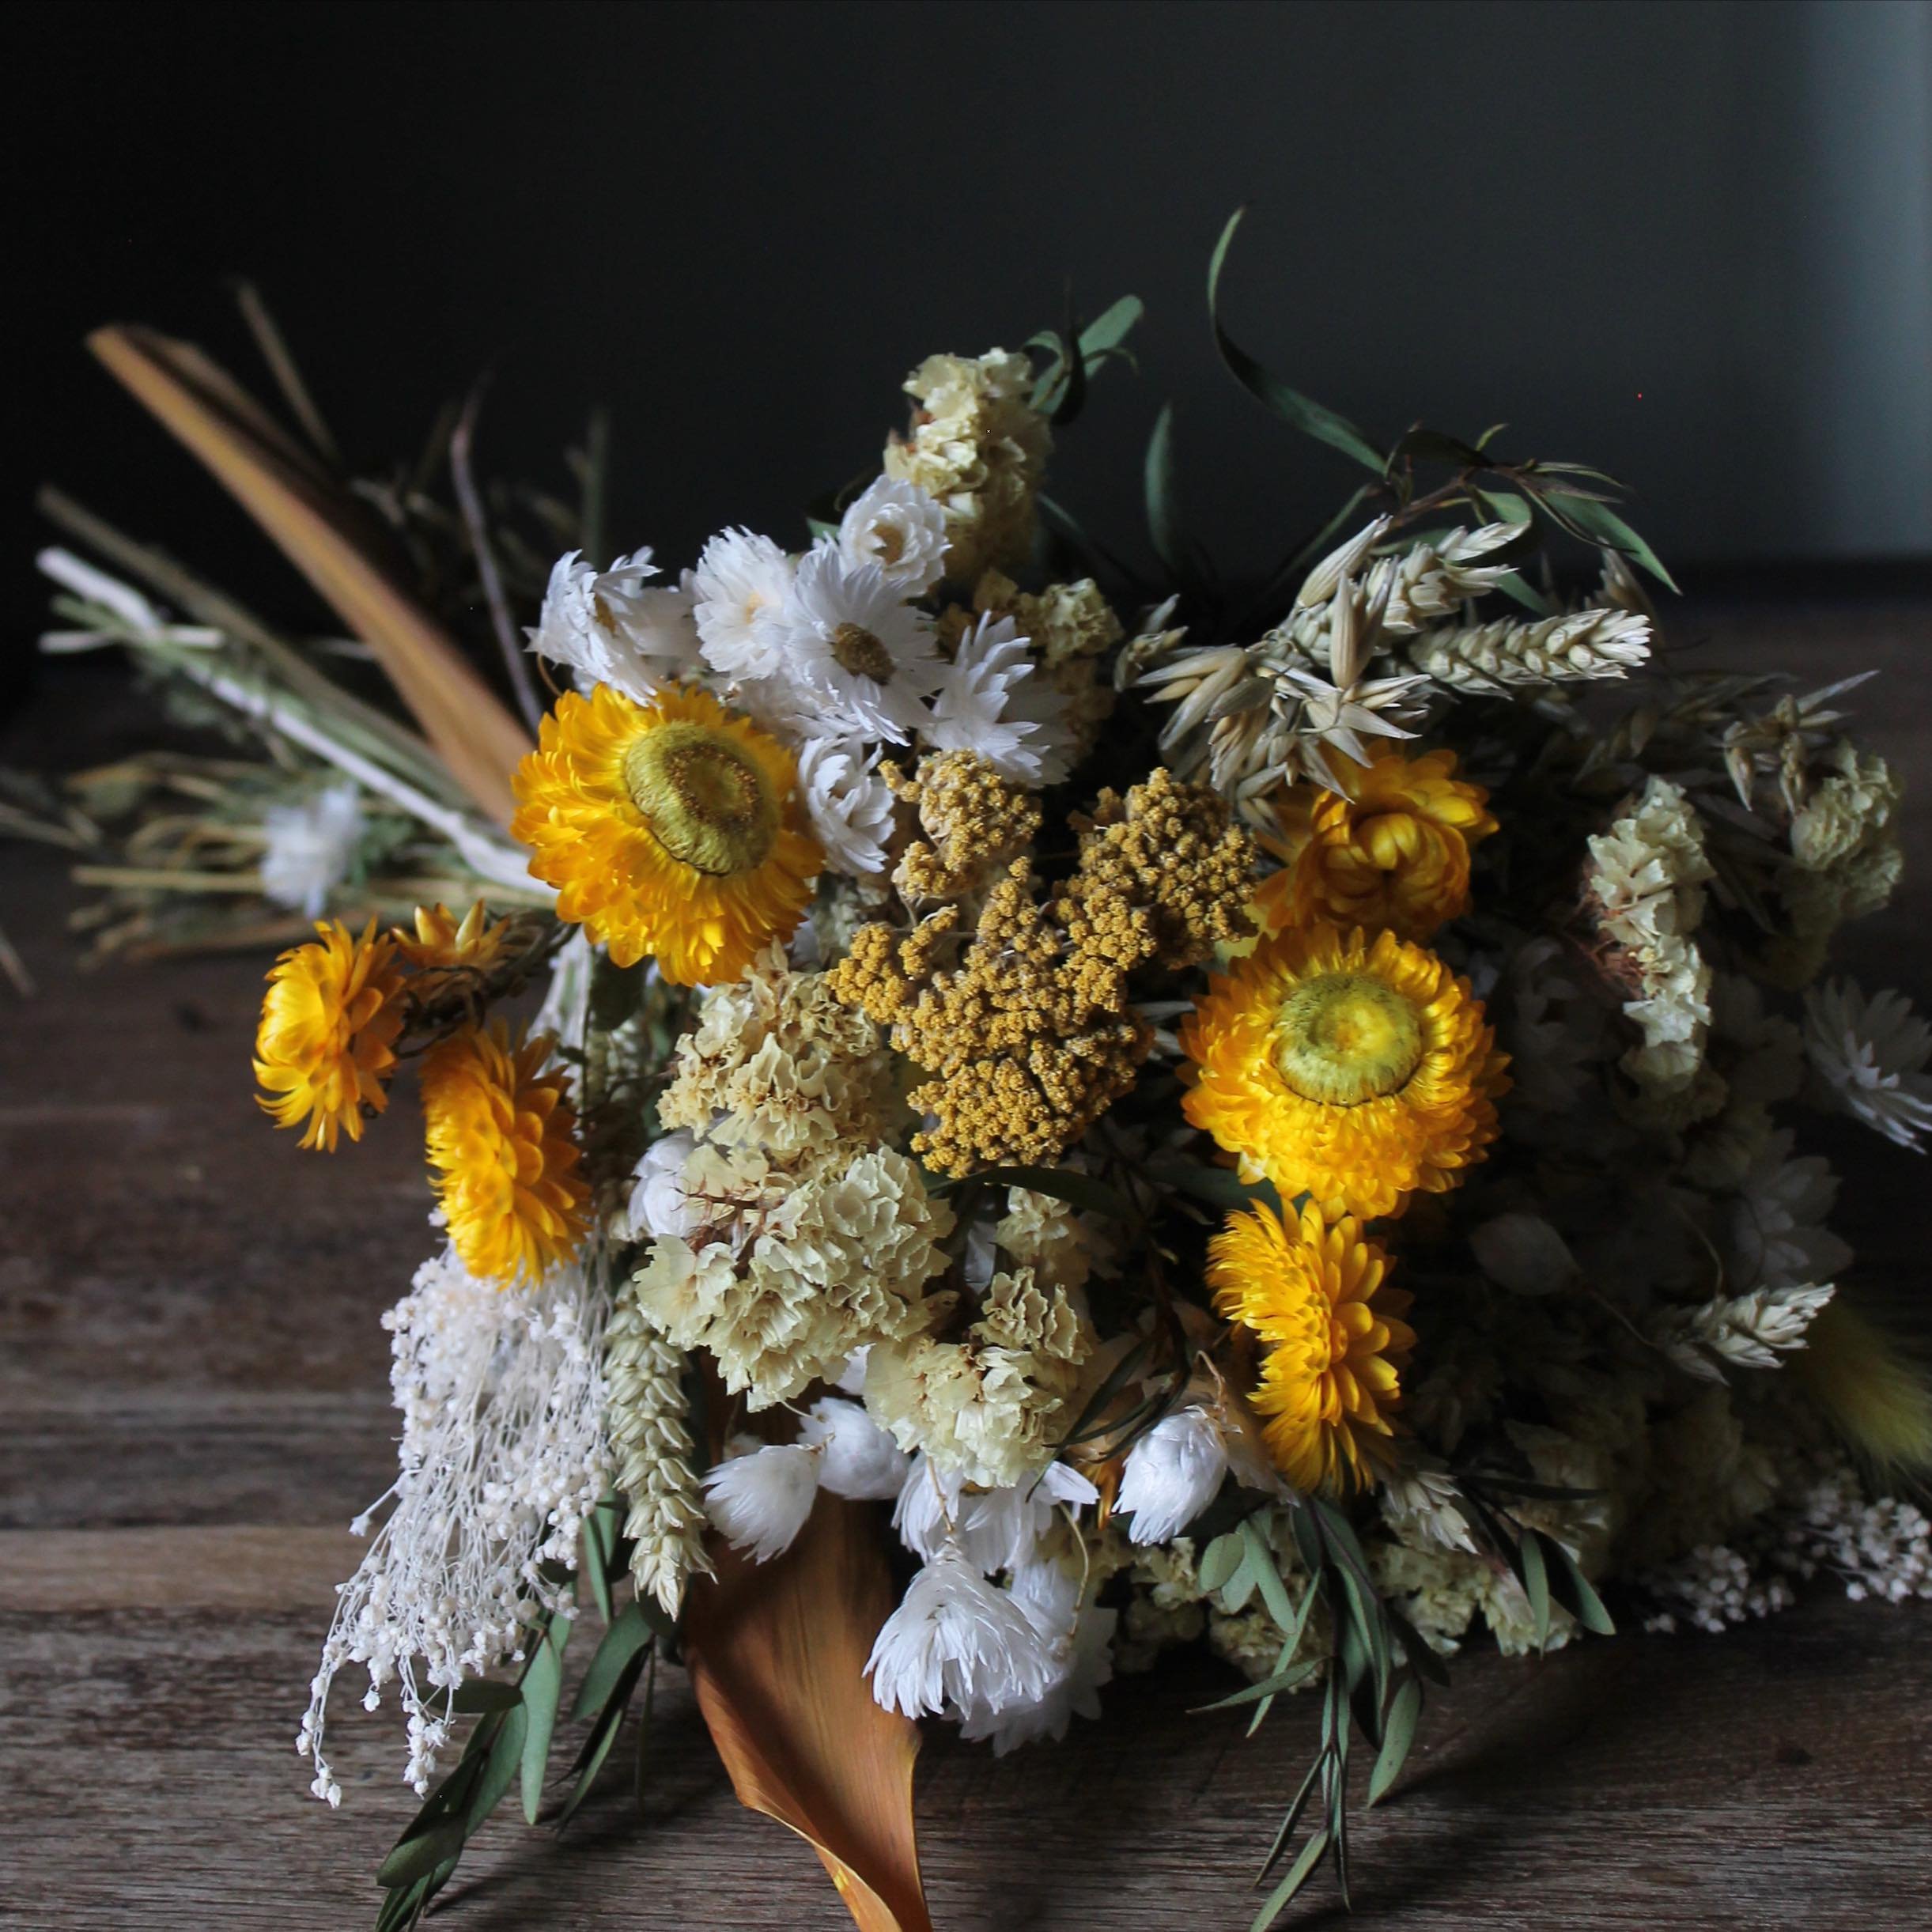 Our dried sunshine bouquet in moody lighting 🌞 we are loving the yellow at the moment it&rsquo;s such a happy and fun colour. 
What other dried bouquet colours would you like to see at our next markets? 

#driedflowers #sunshine #easter #prettybunch